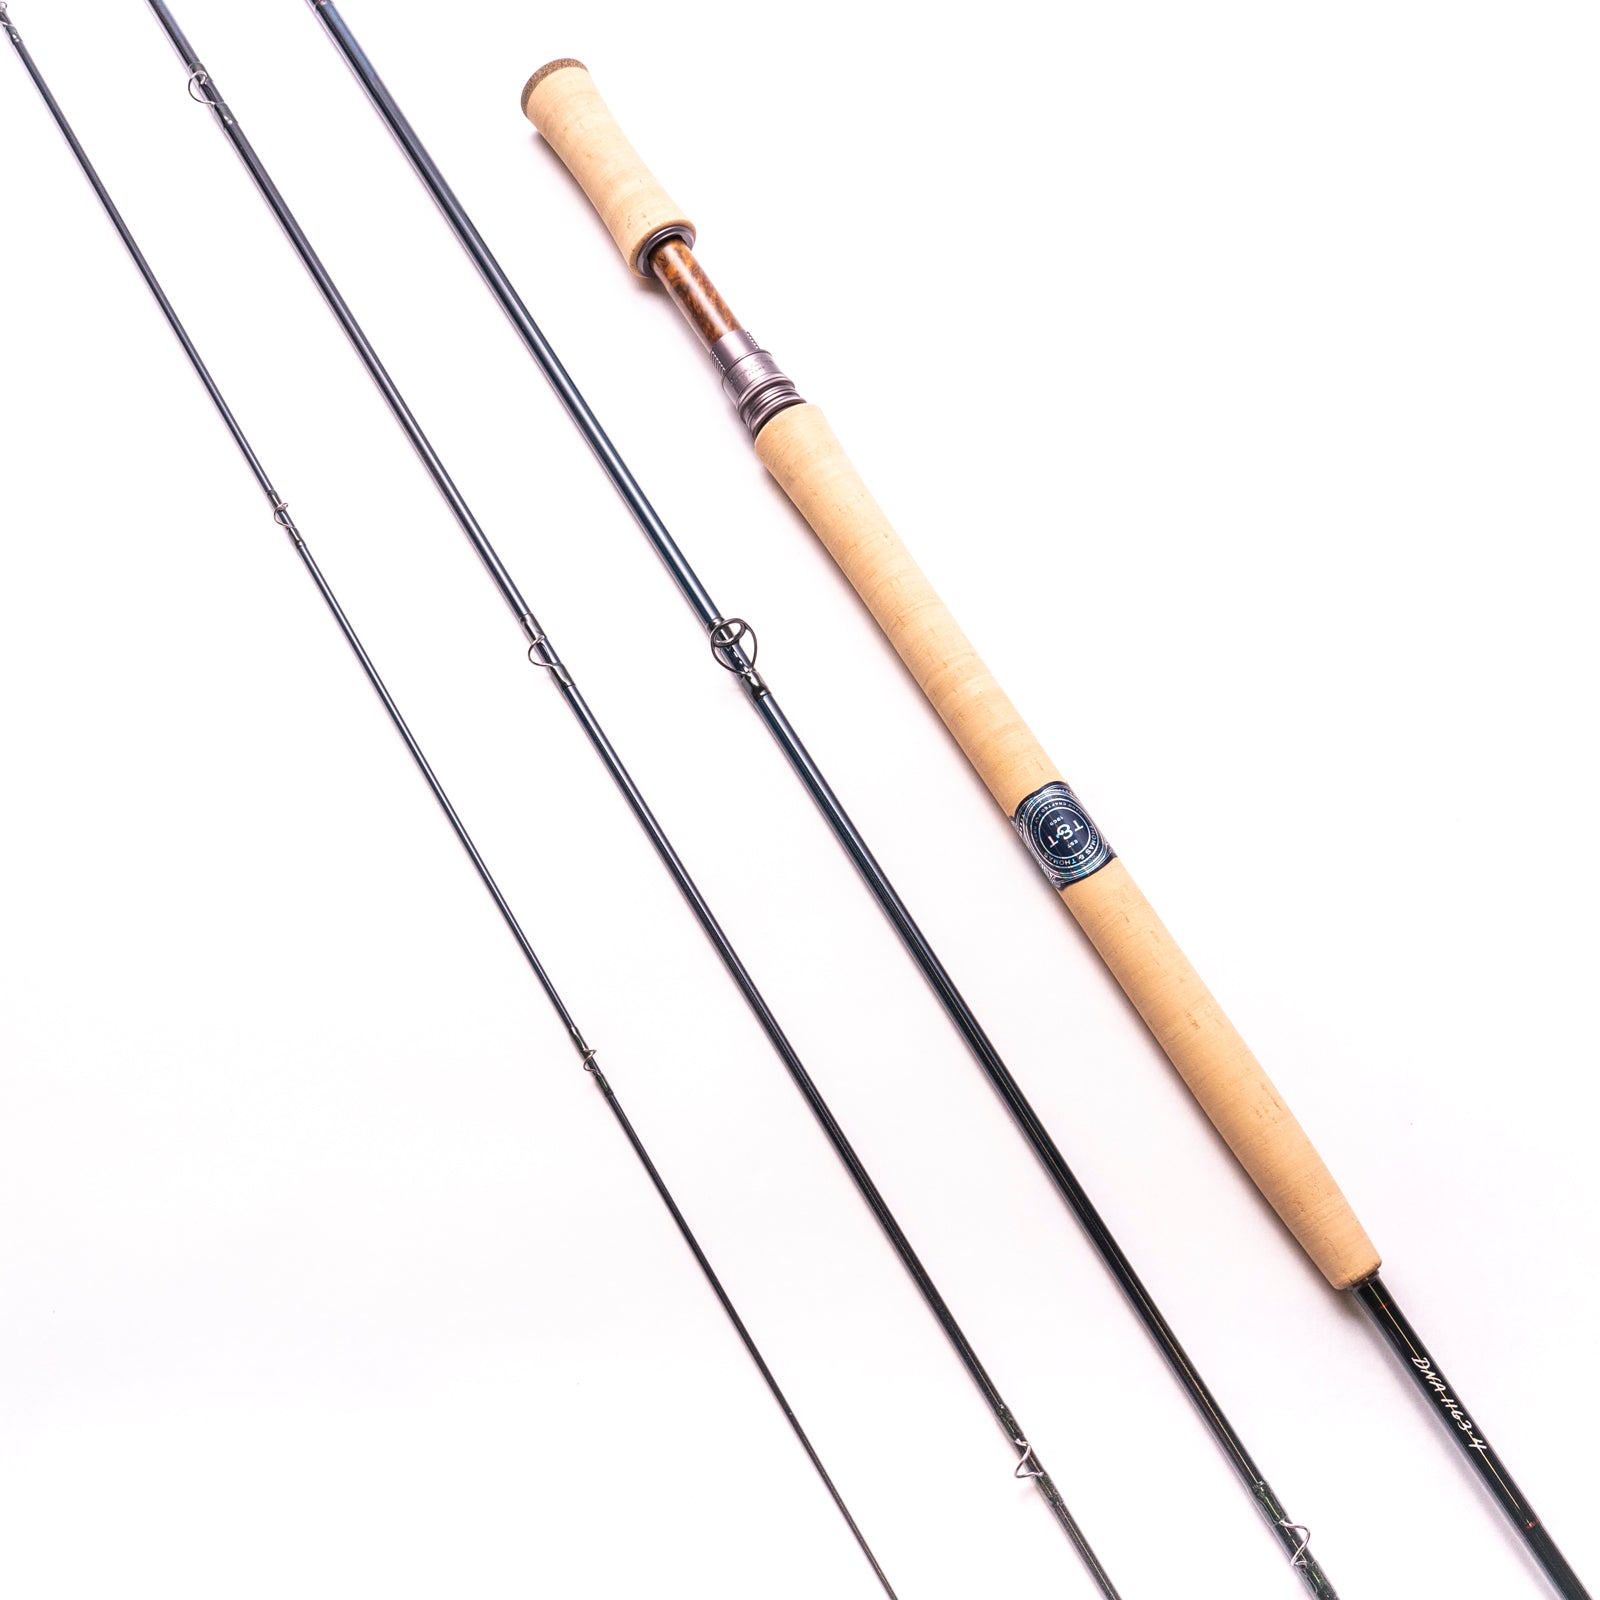 Thomas & Thomas DNA Trout Spey – Emerald Water Anglers